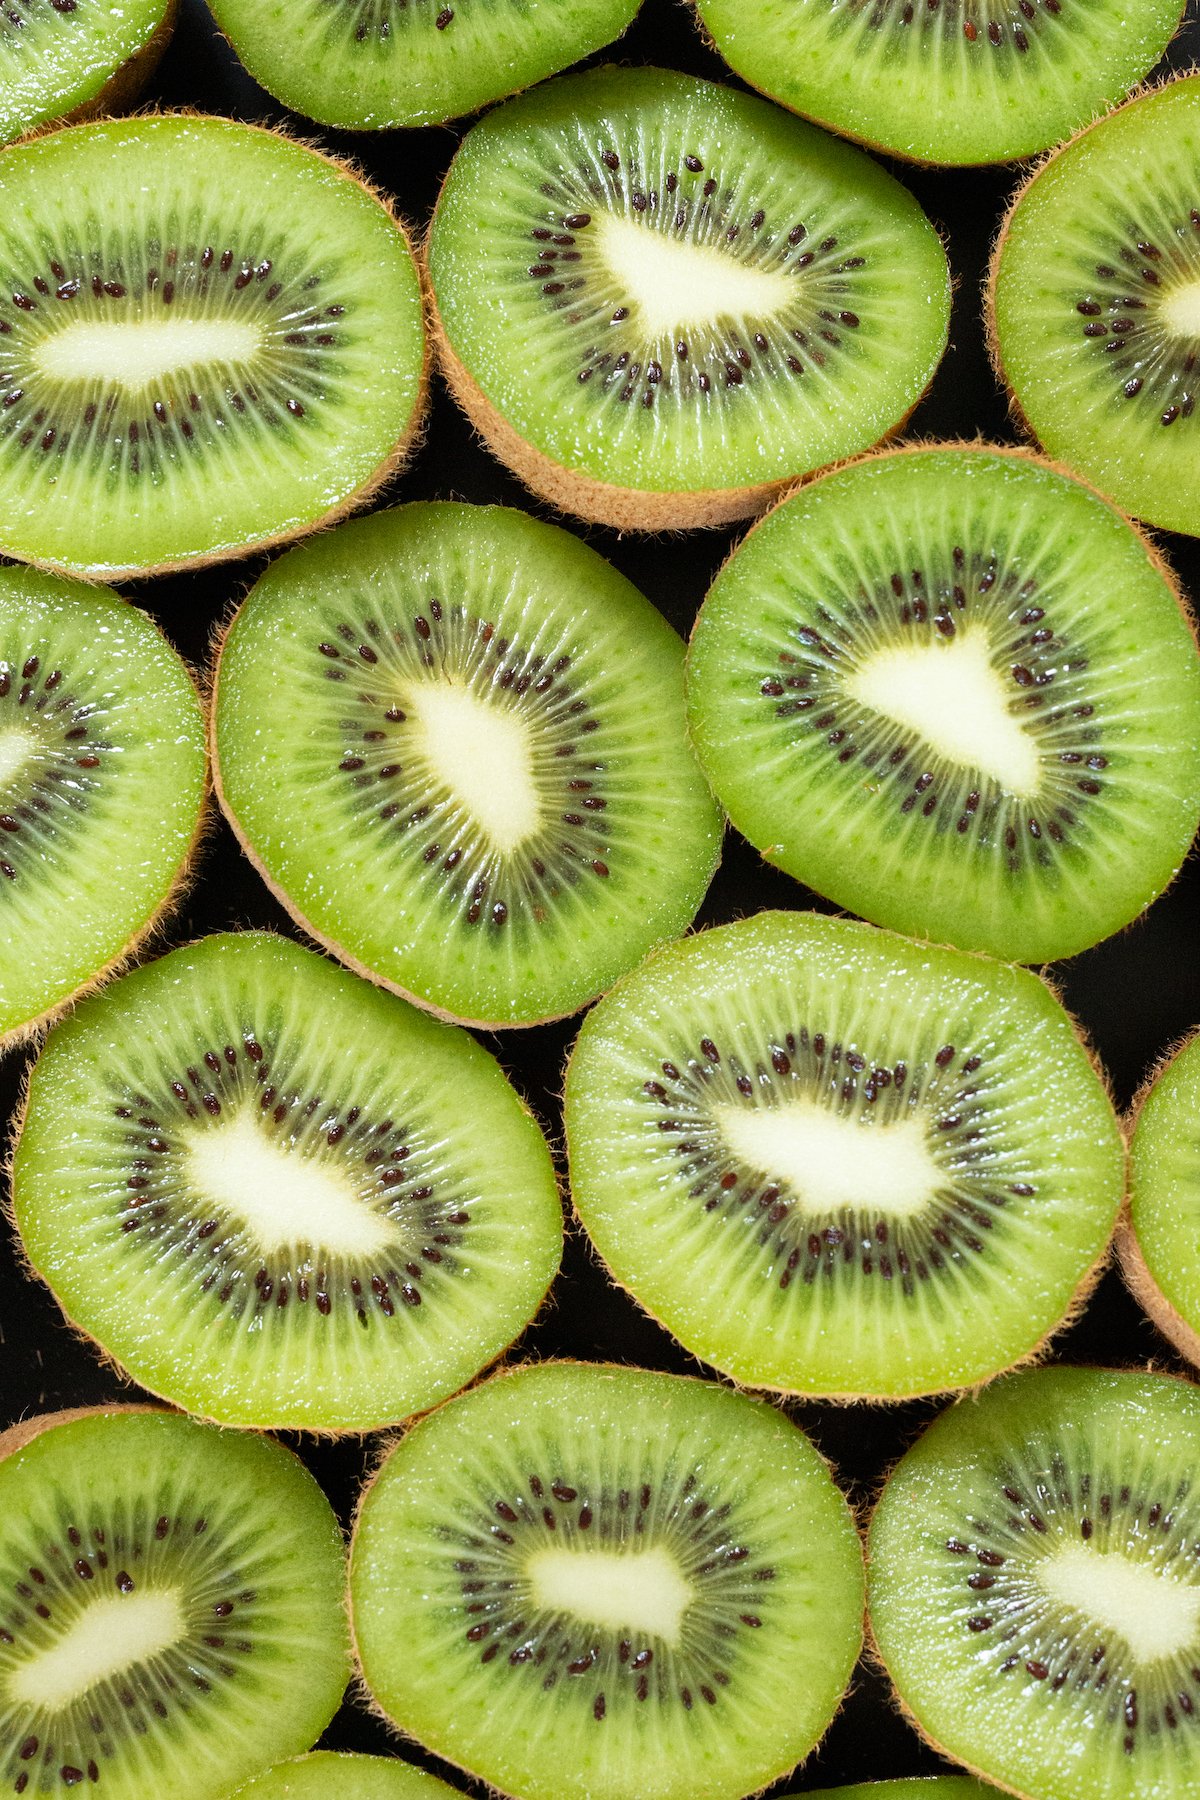 Overhead look at about a dozen of green kiwis that have been sliced in half.